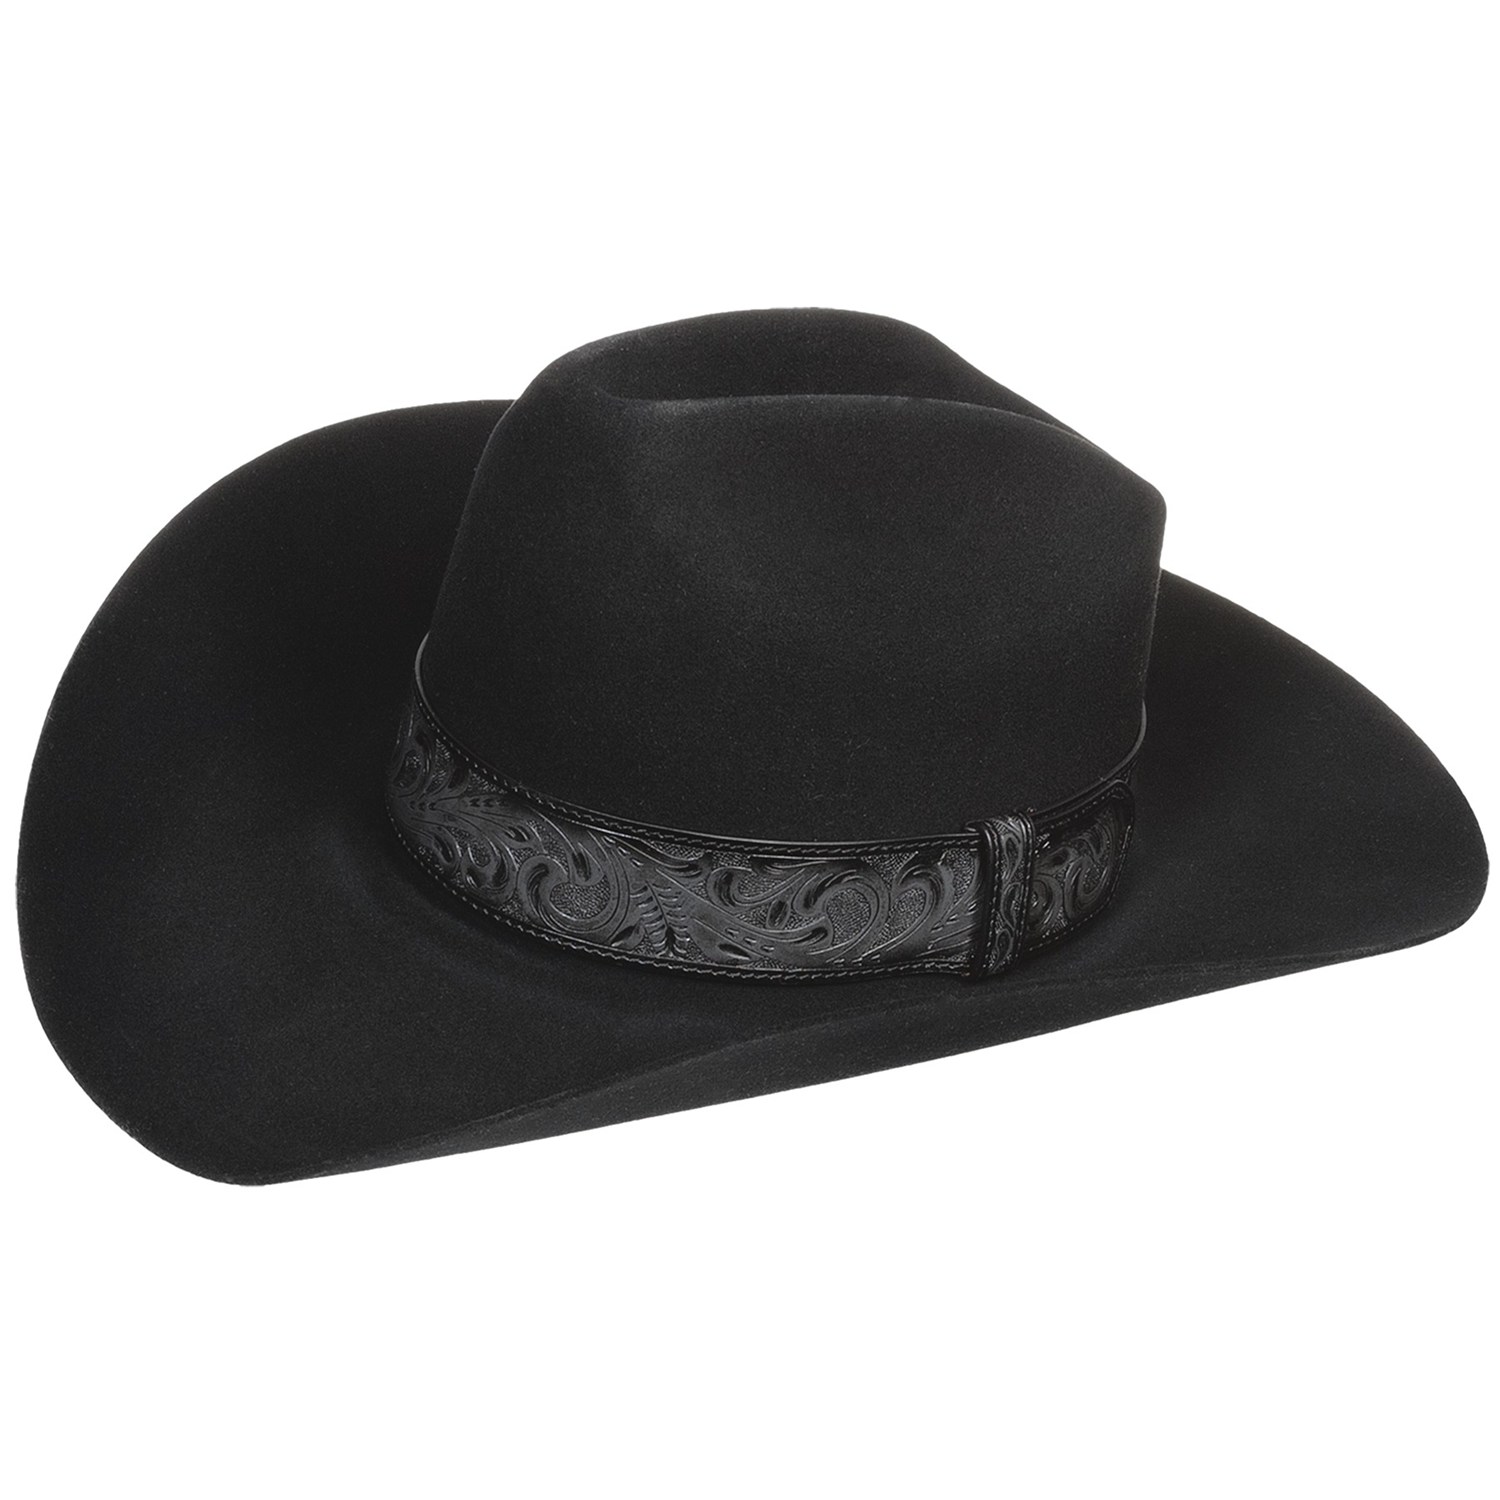 Men's Cowboy Hats up to 72% off at Sierra Trading Post